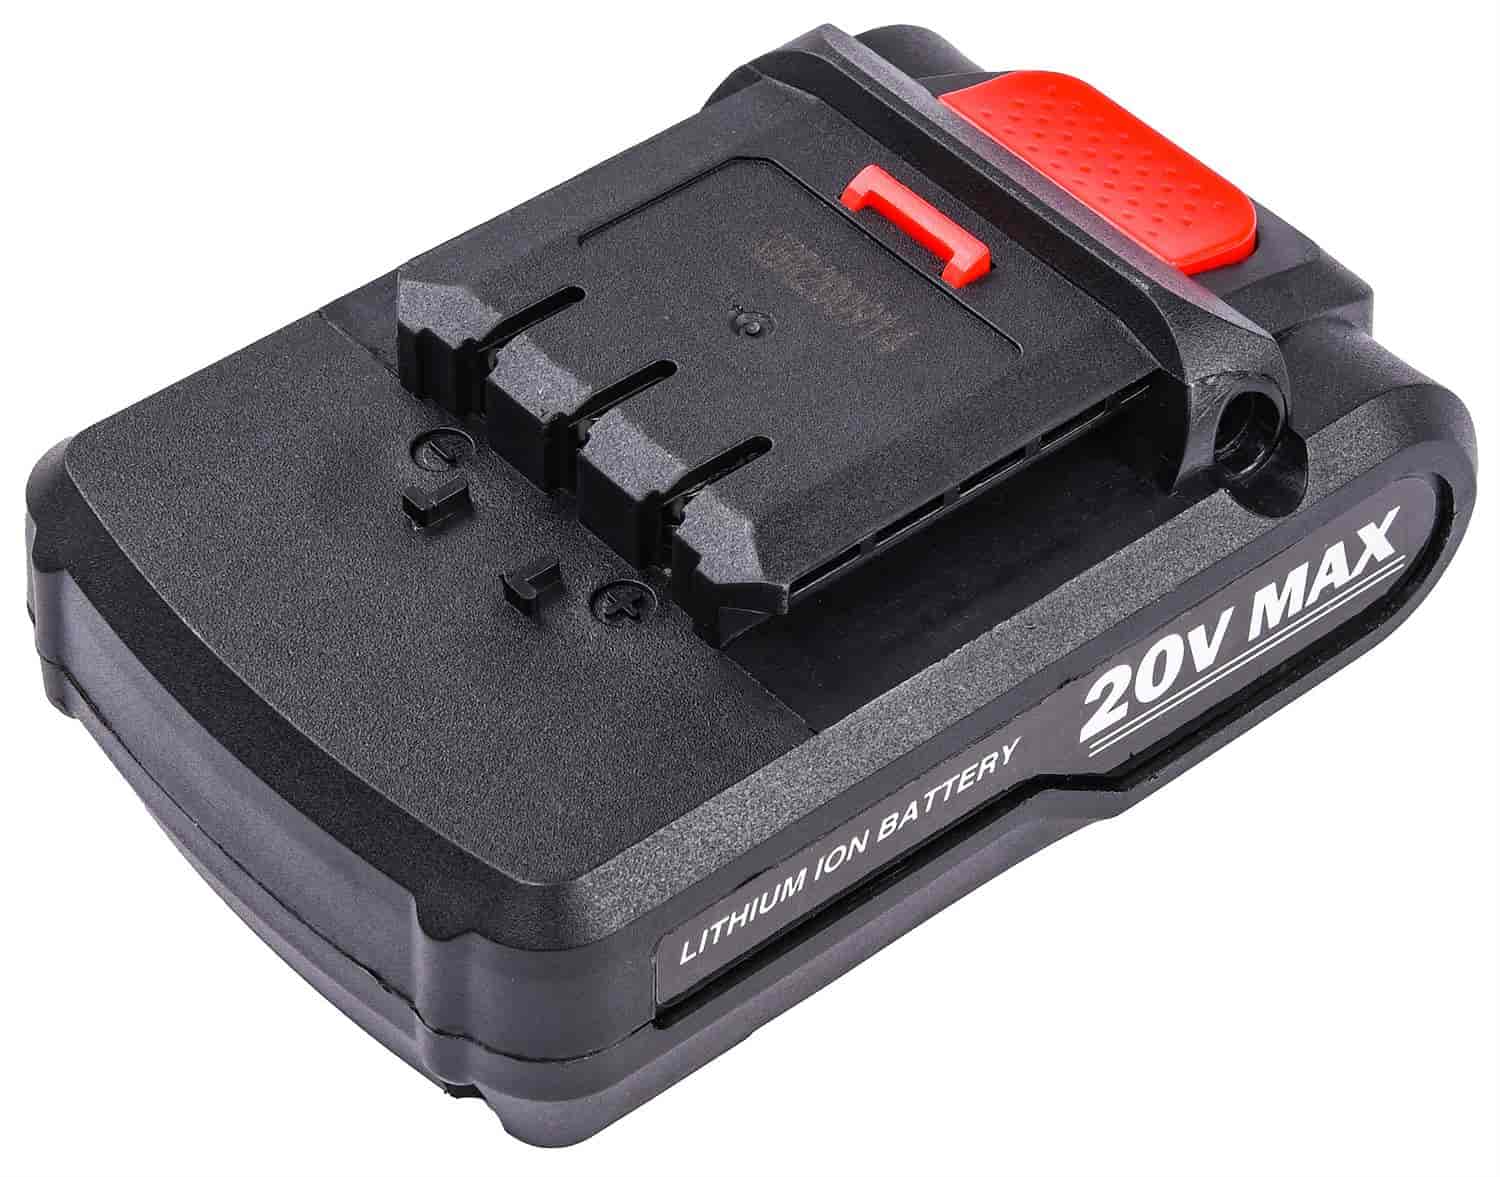 Replacement 20-Volt Max Battery for 555-81026 Cordless Grease Gun